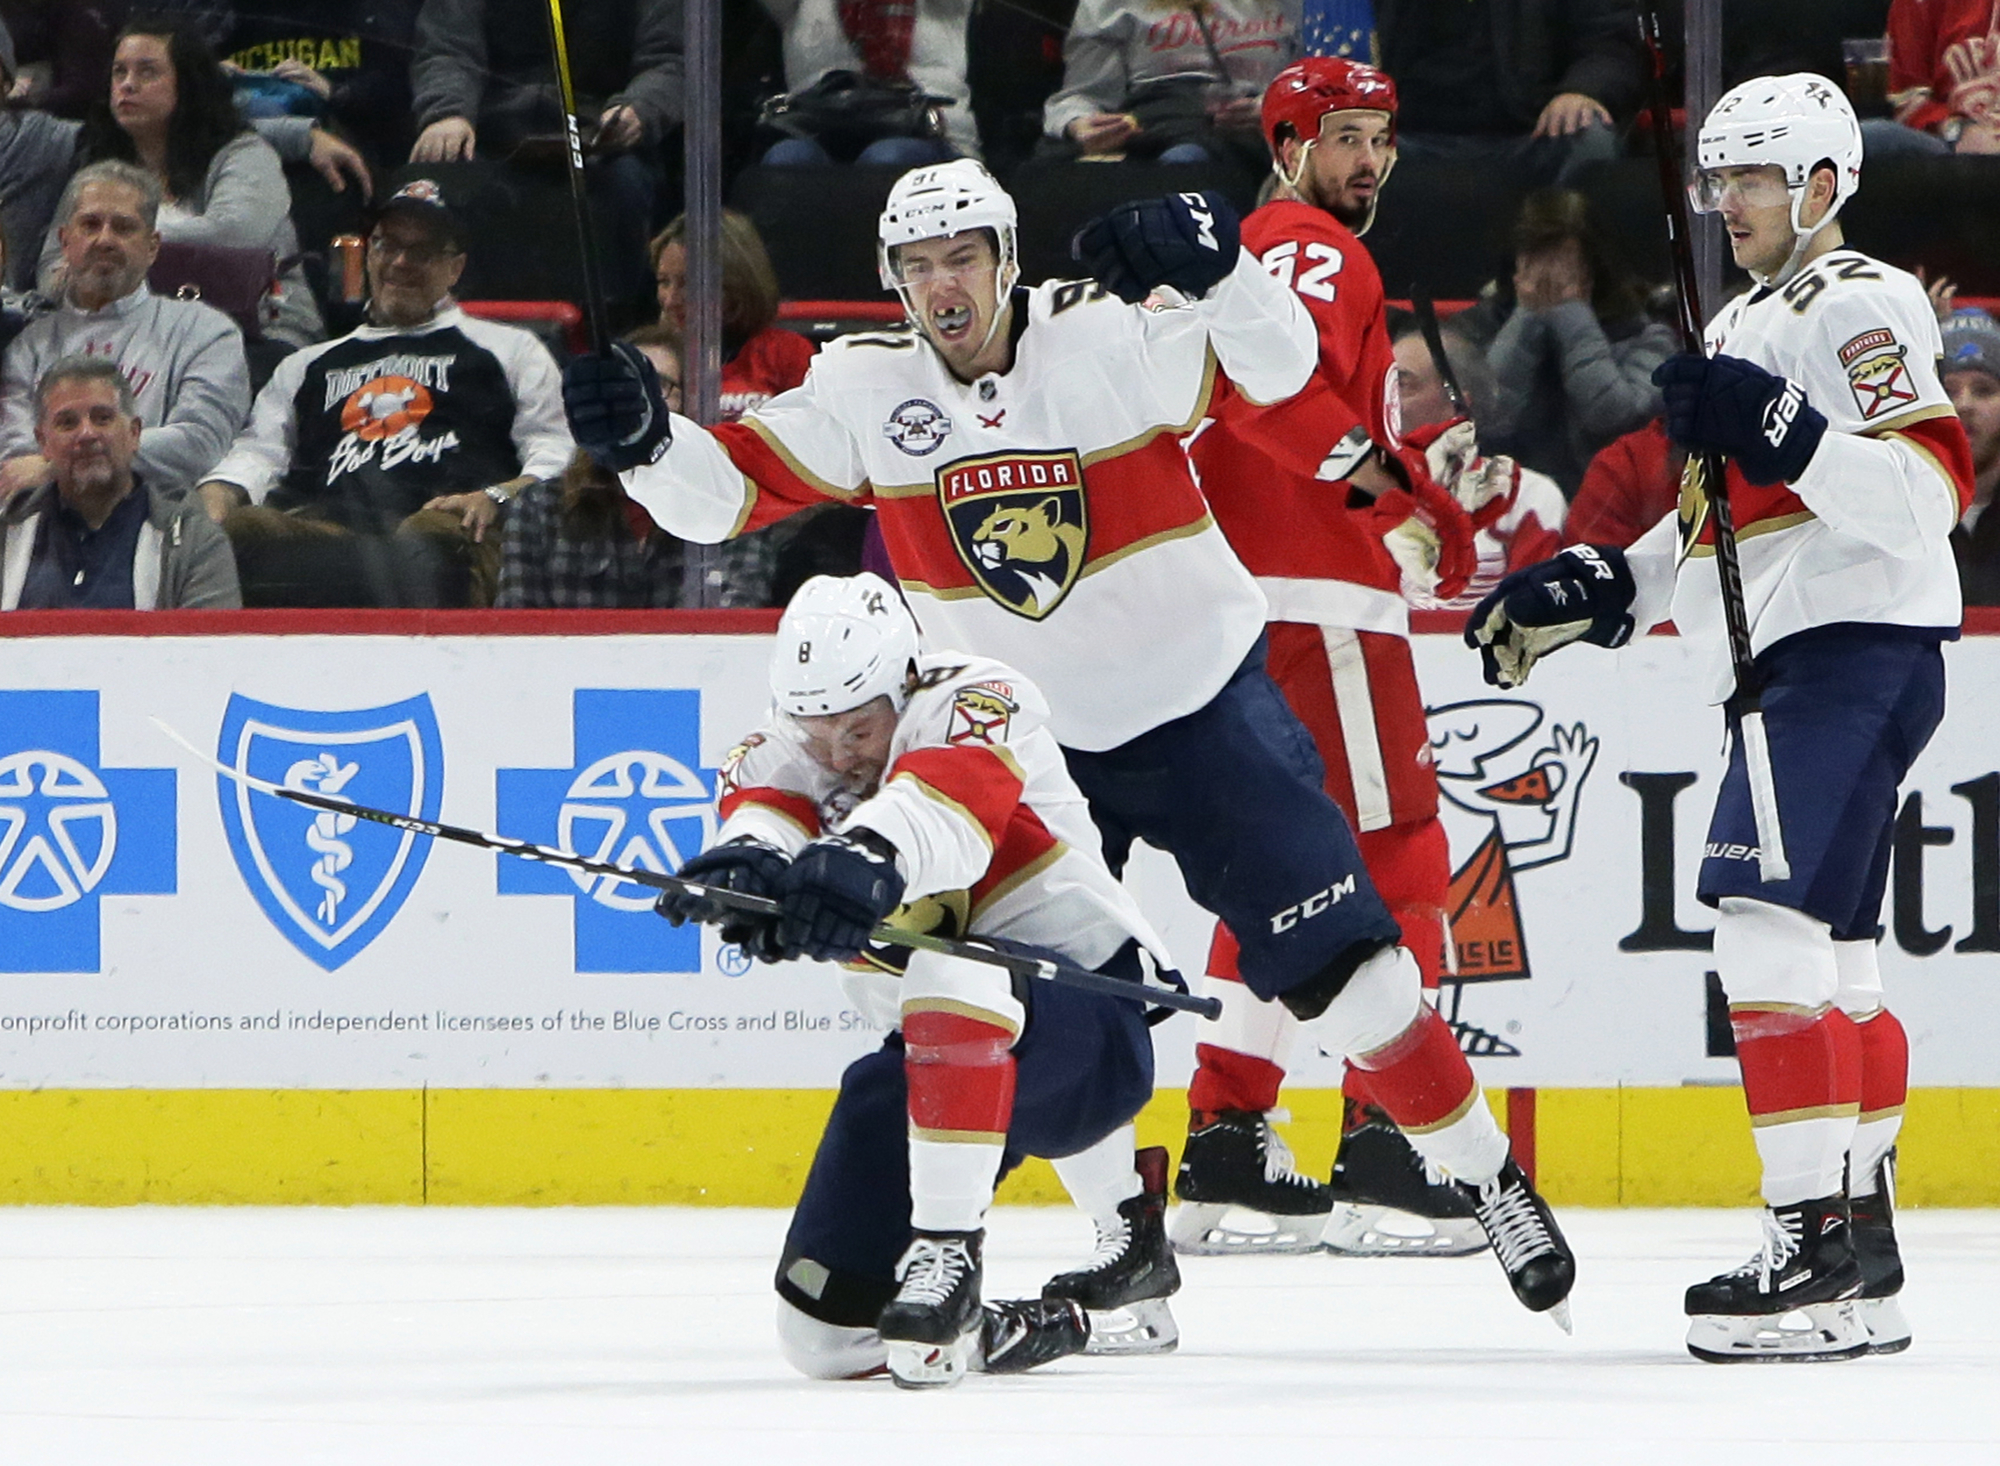 Panthers beat struggling Red Wings 4-3 in shootout